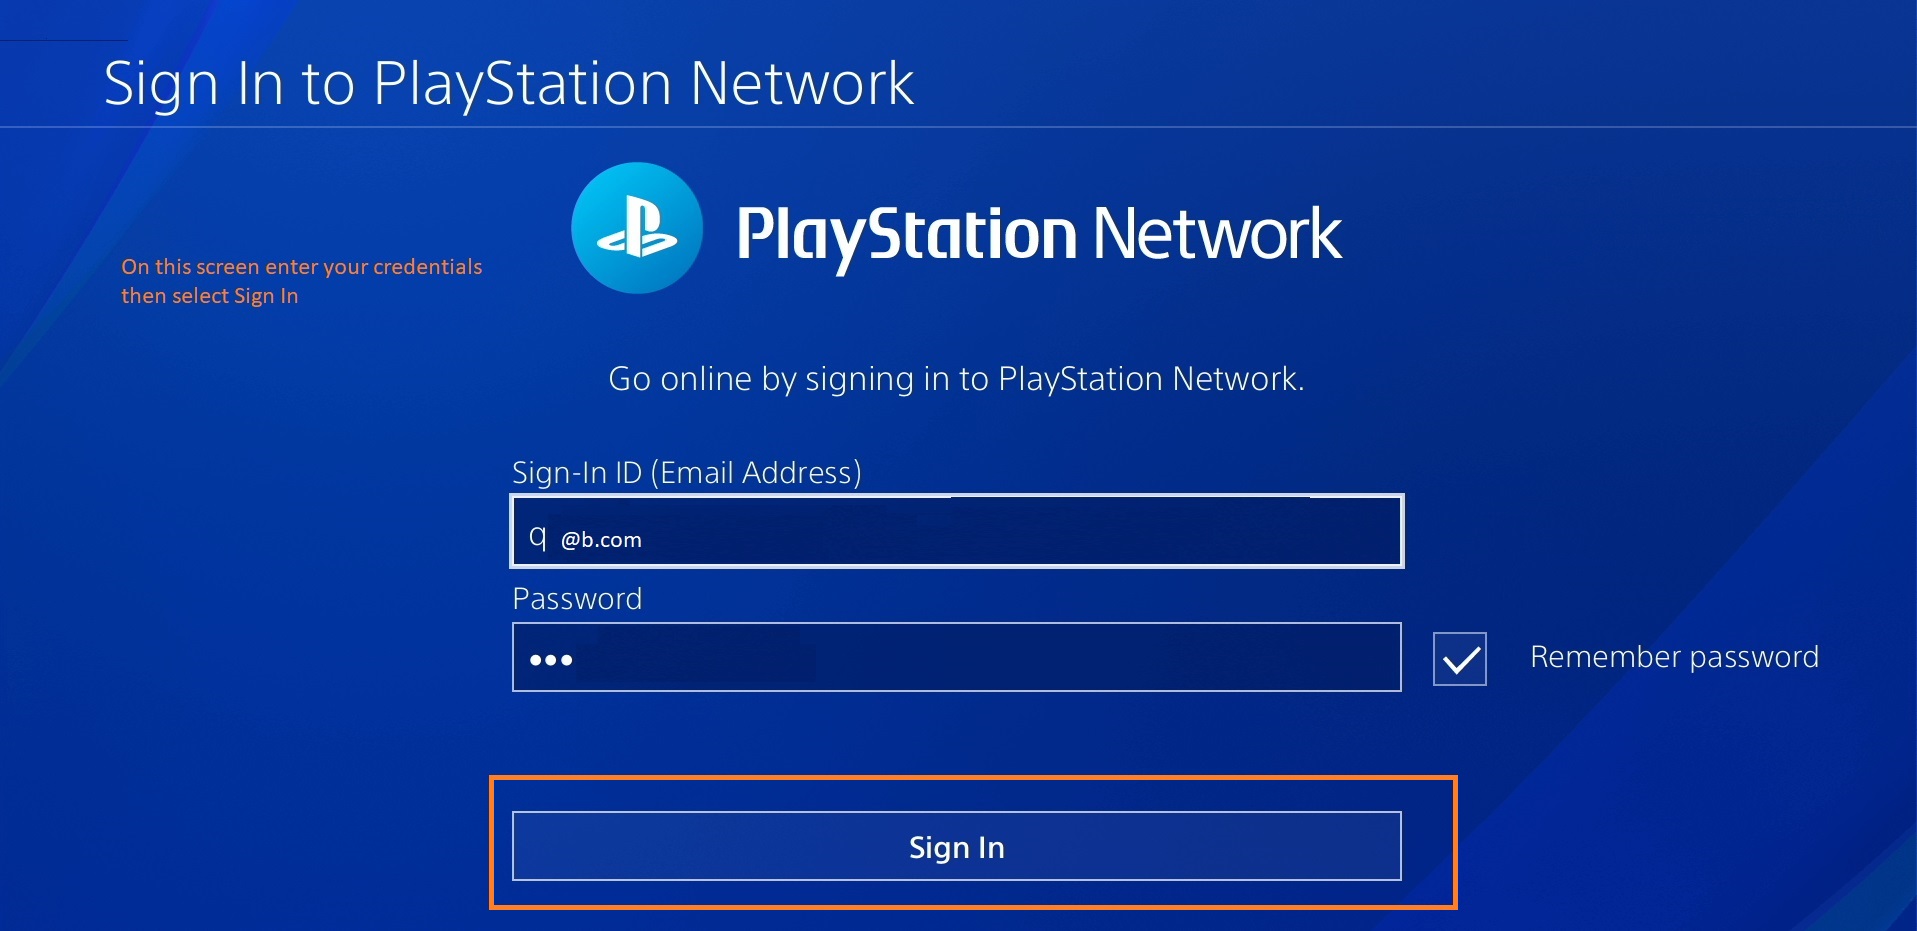 PS Network Sign In screen. Email address field, then password with checkbox at right to remember. Sign In button below.